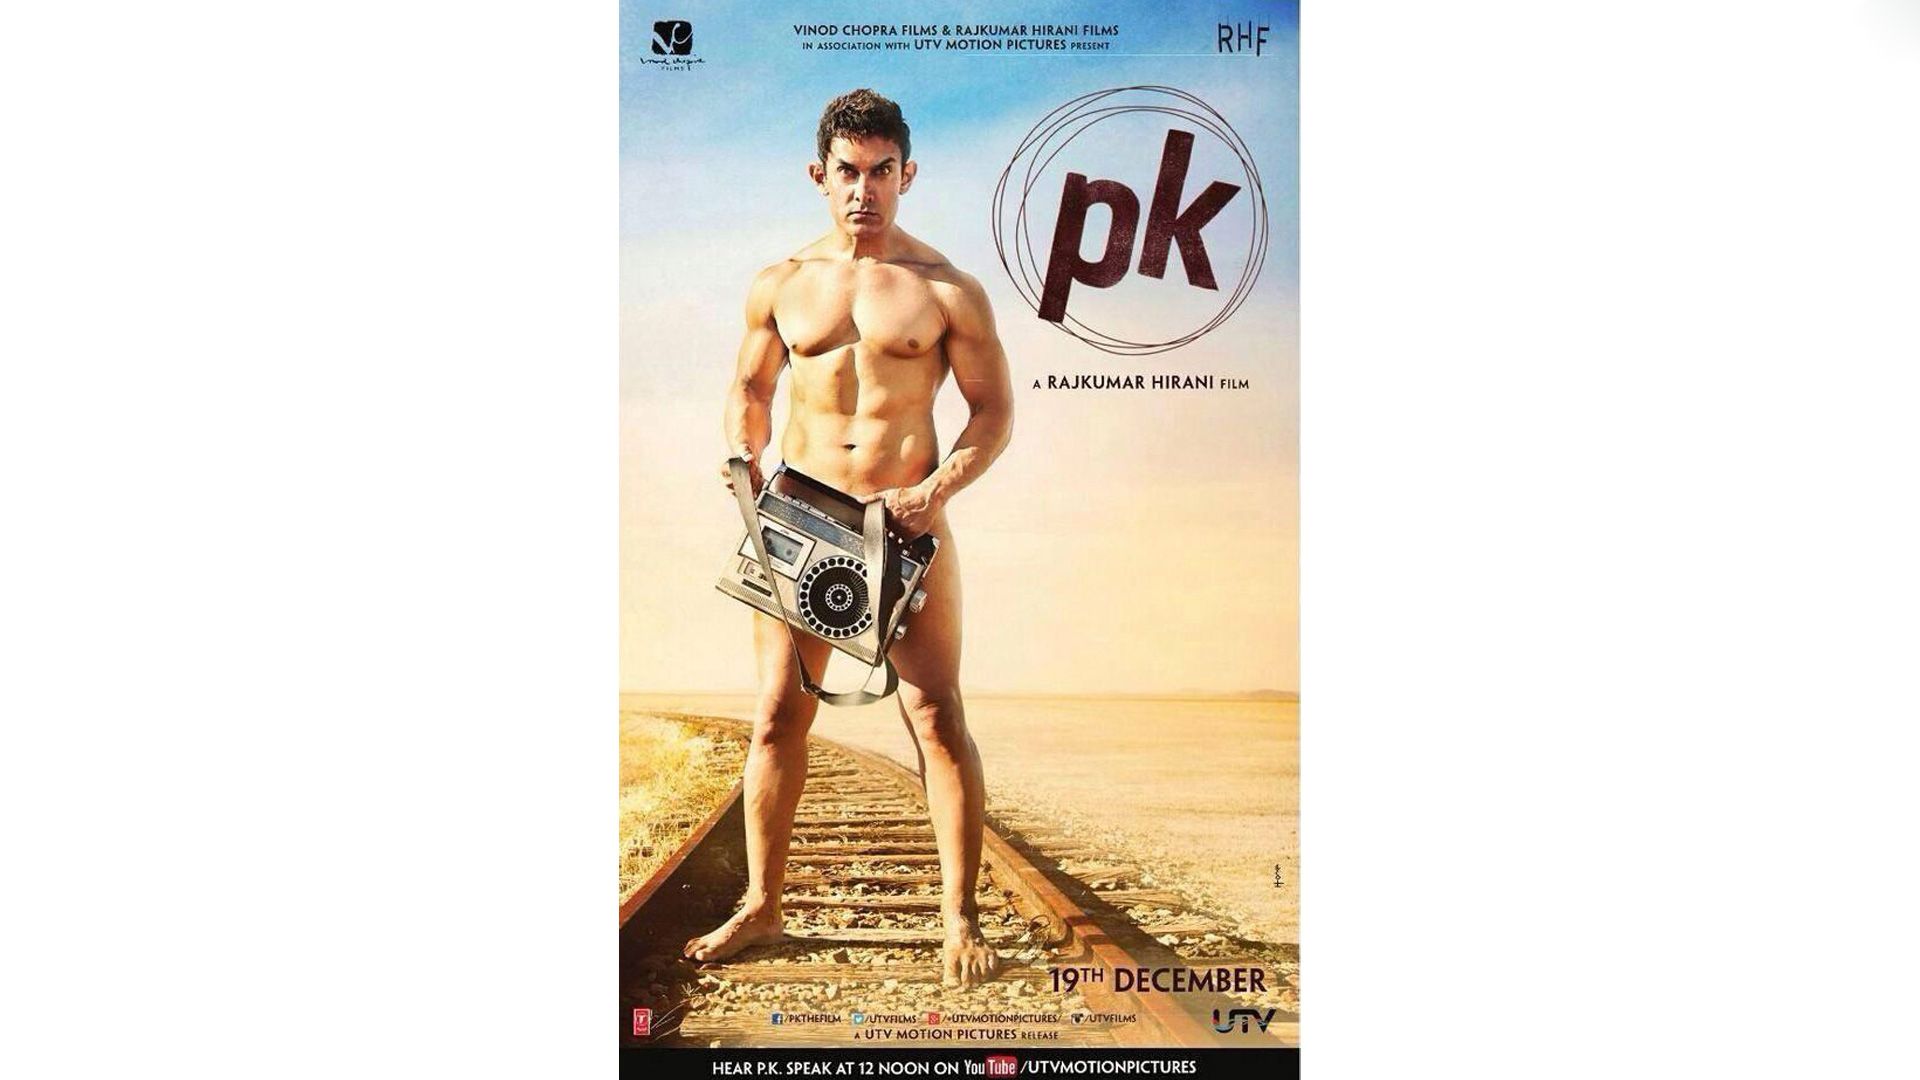 Free Download 100% Pure PK Movie HD Wallpaper, Latest Photohoots, beautiful Image and more for pc, laptops, iphone and more. Movies Indian movies, Movies